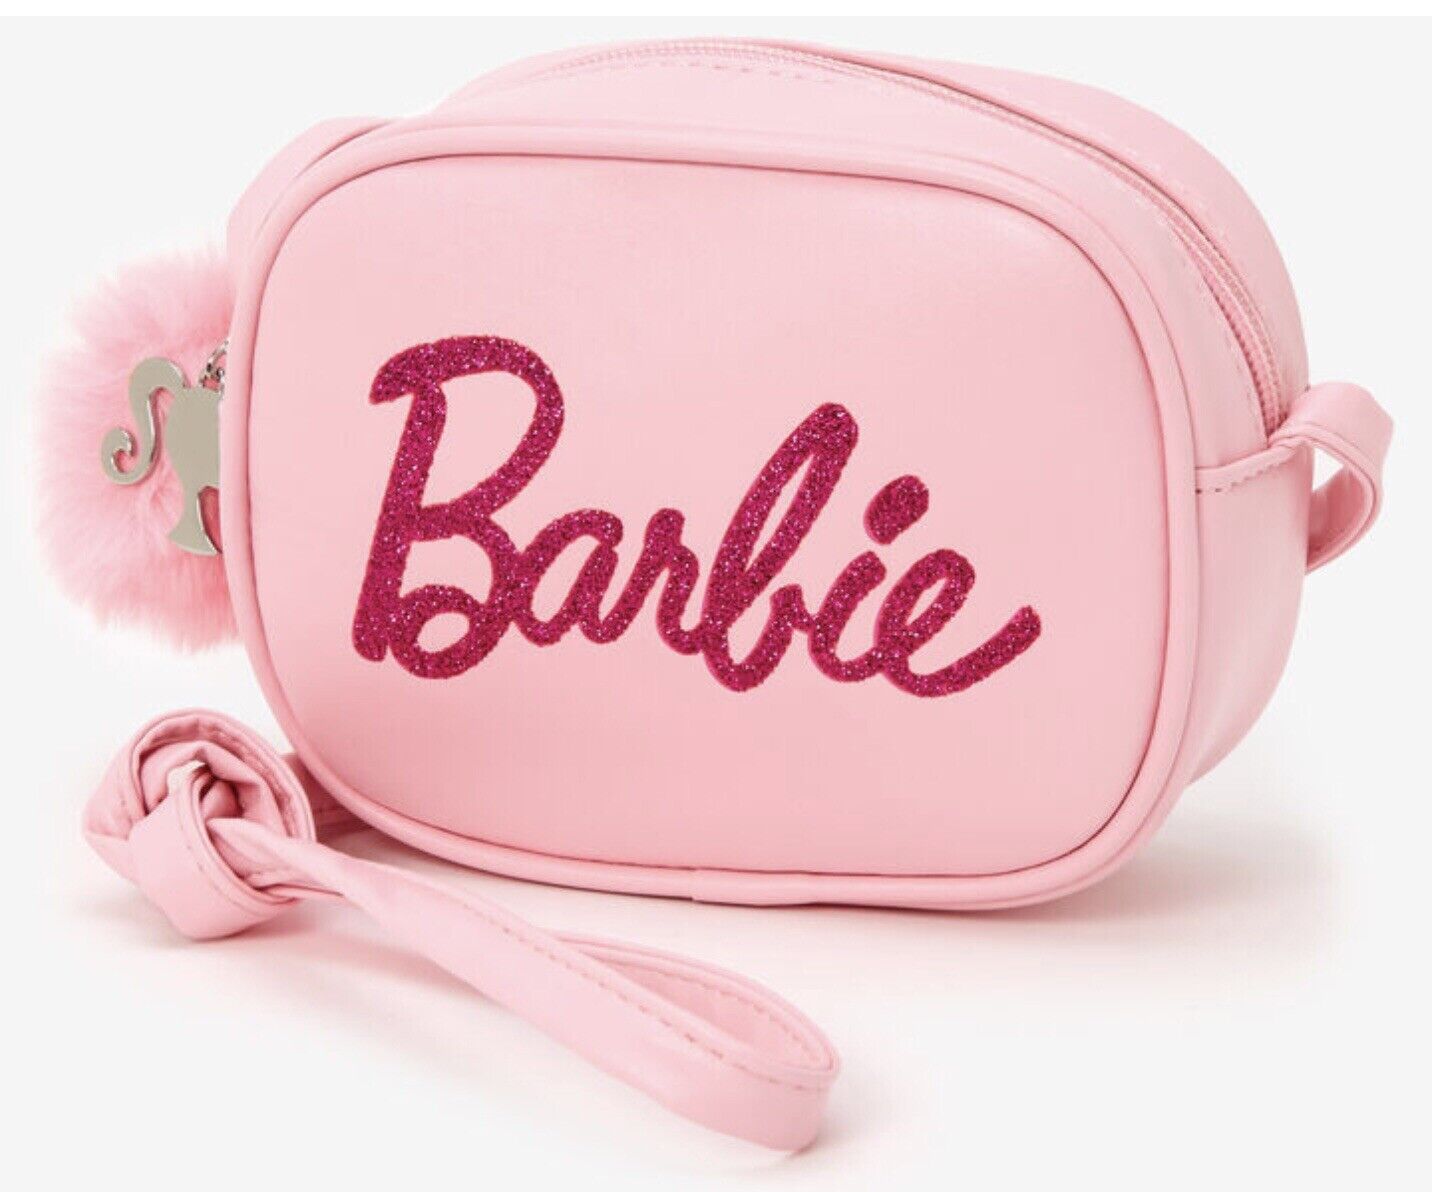 Barbie Crossbody Handbag Purse New With Tags Sold Out Claire’s